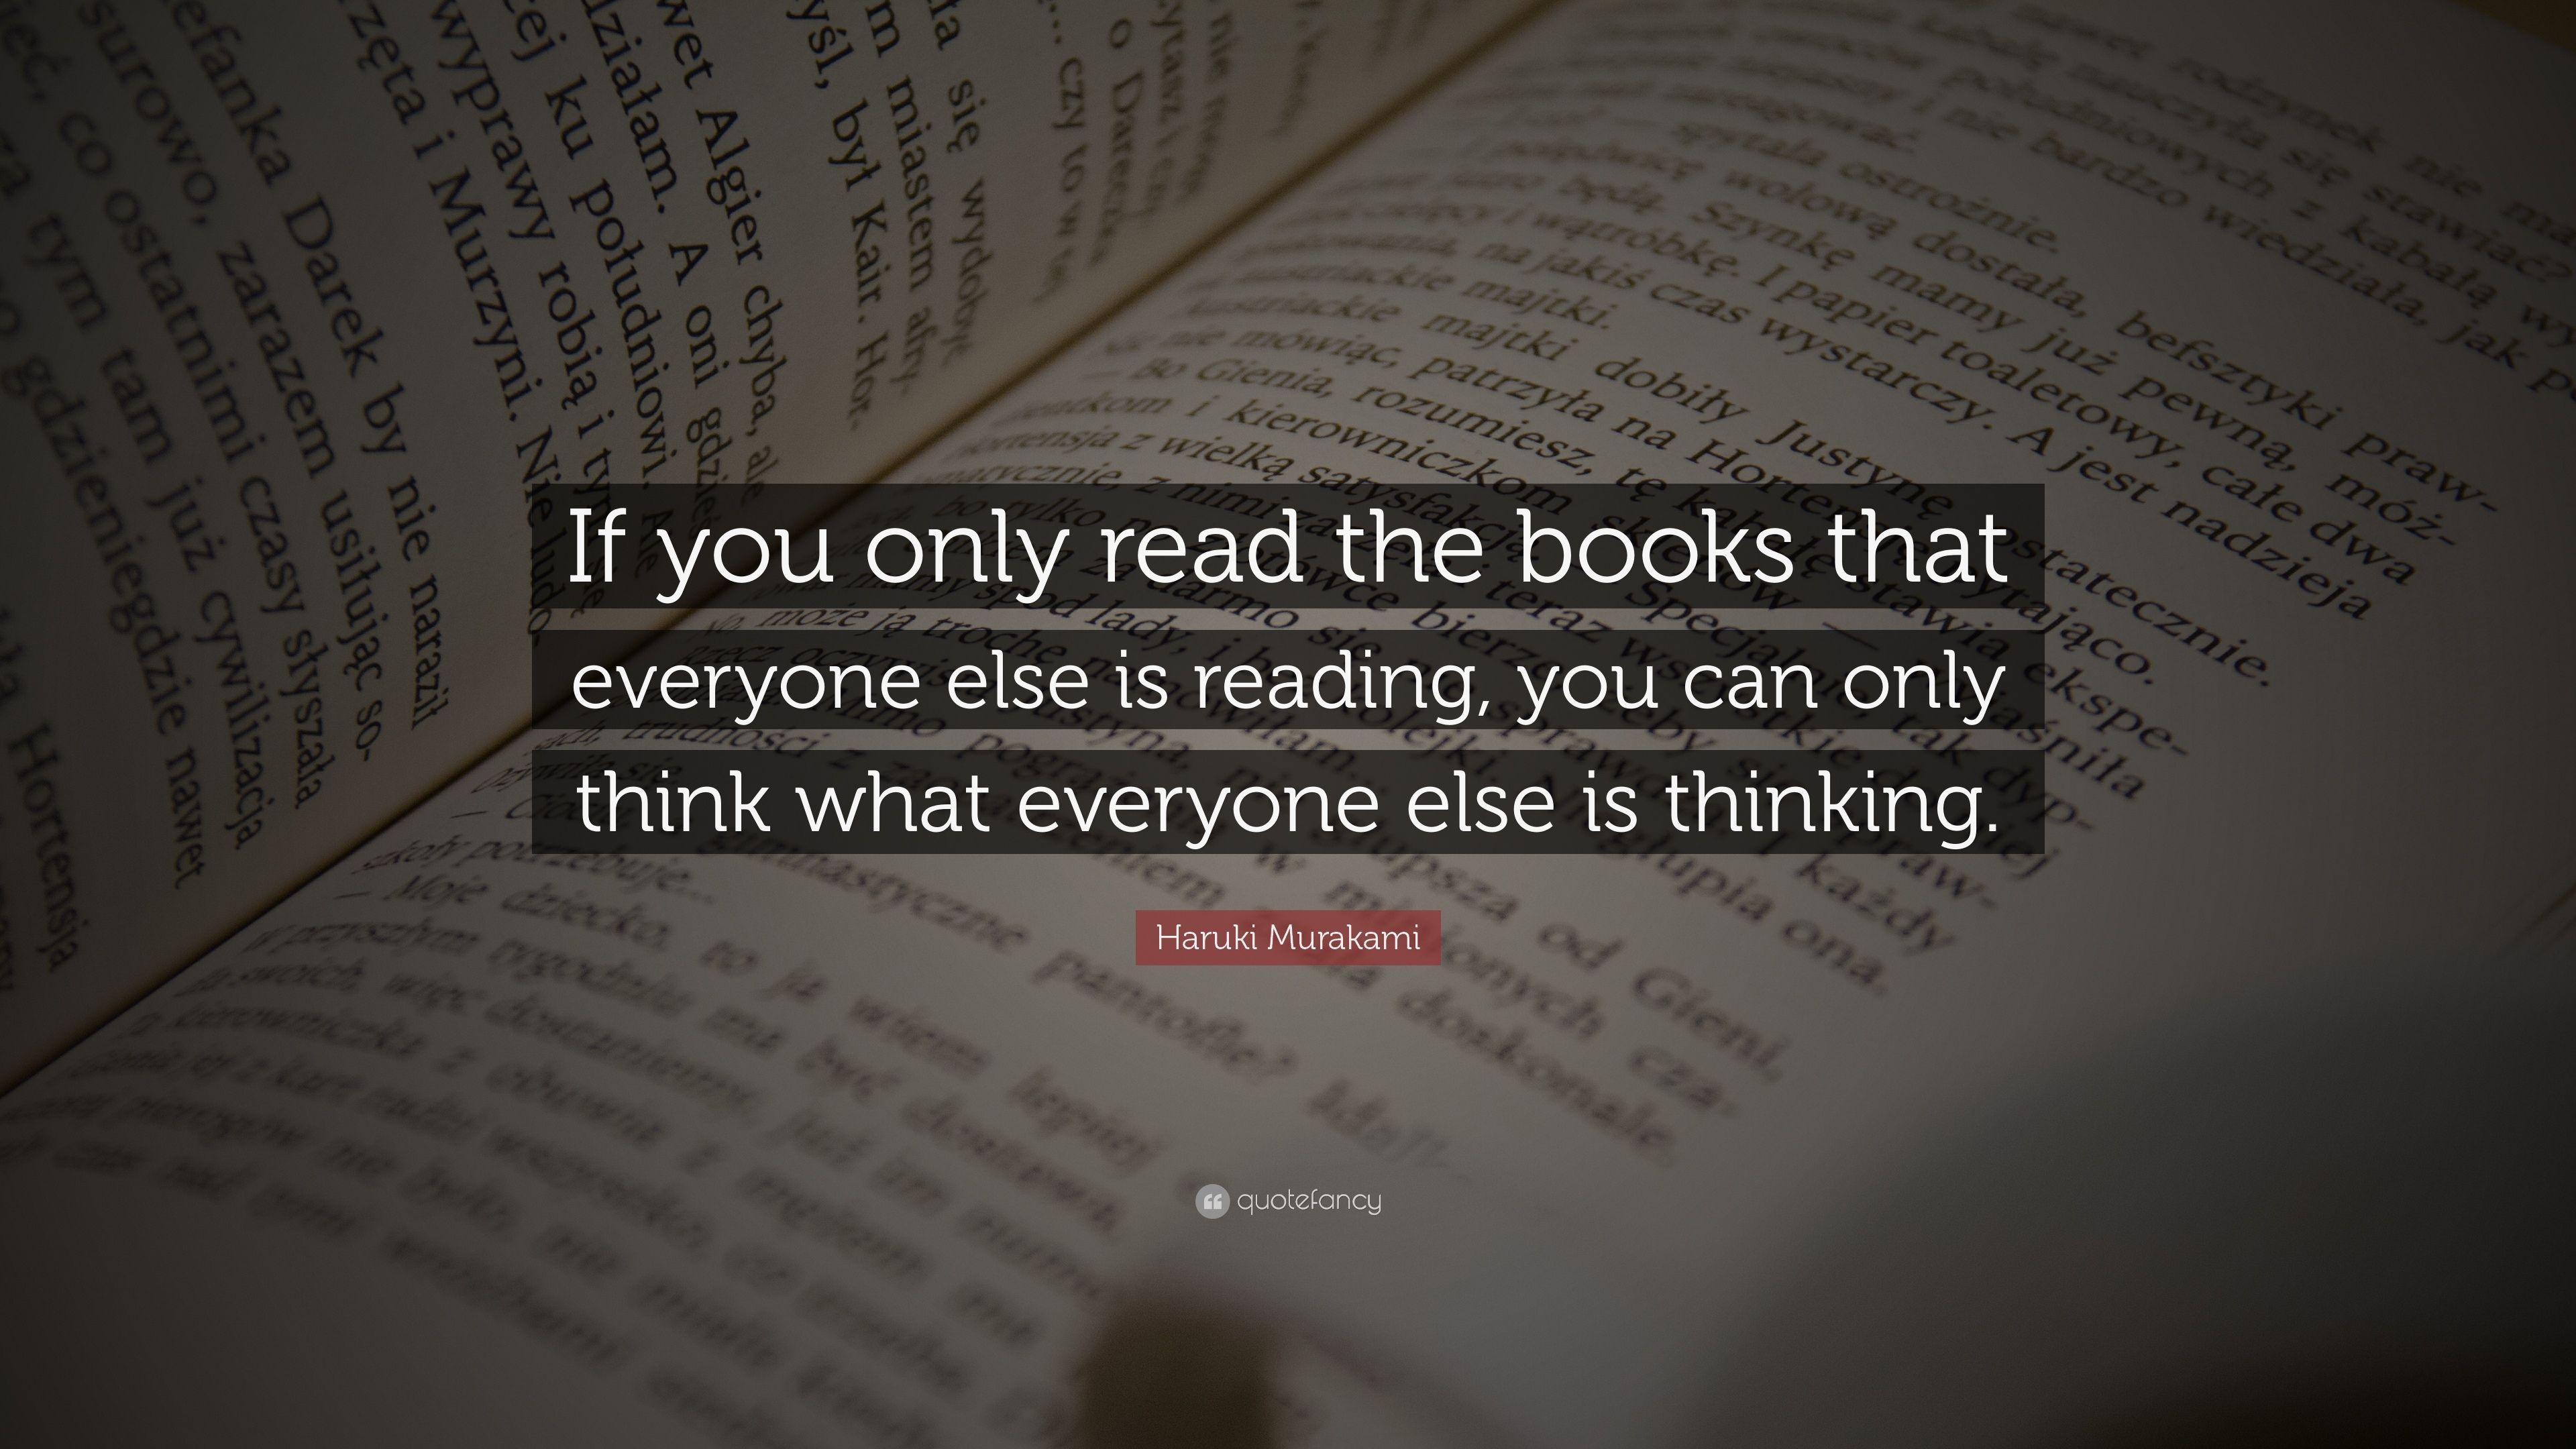 Haruki Murakami Quote: “If you only read the books that